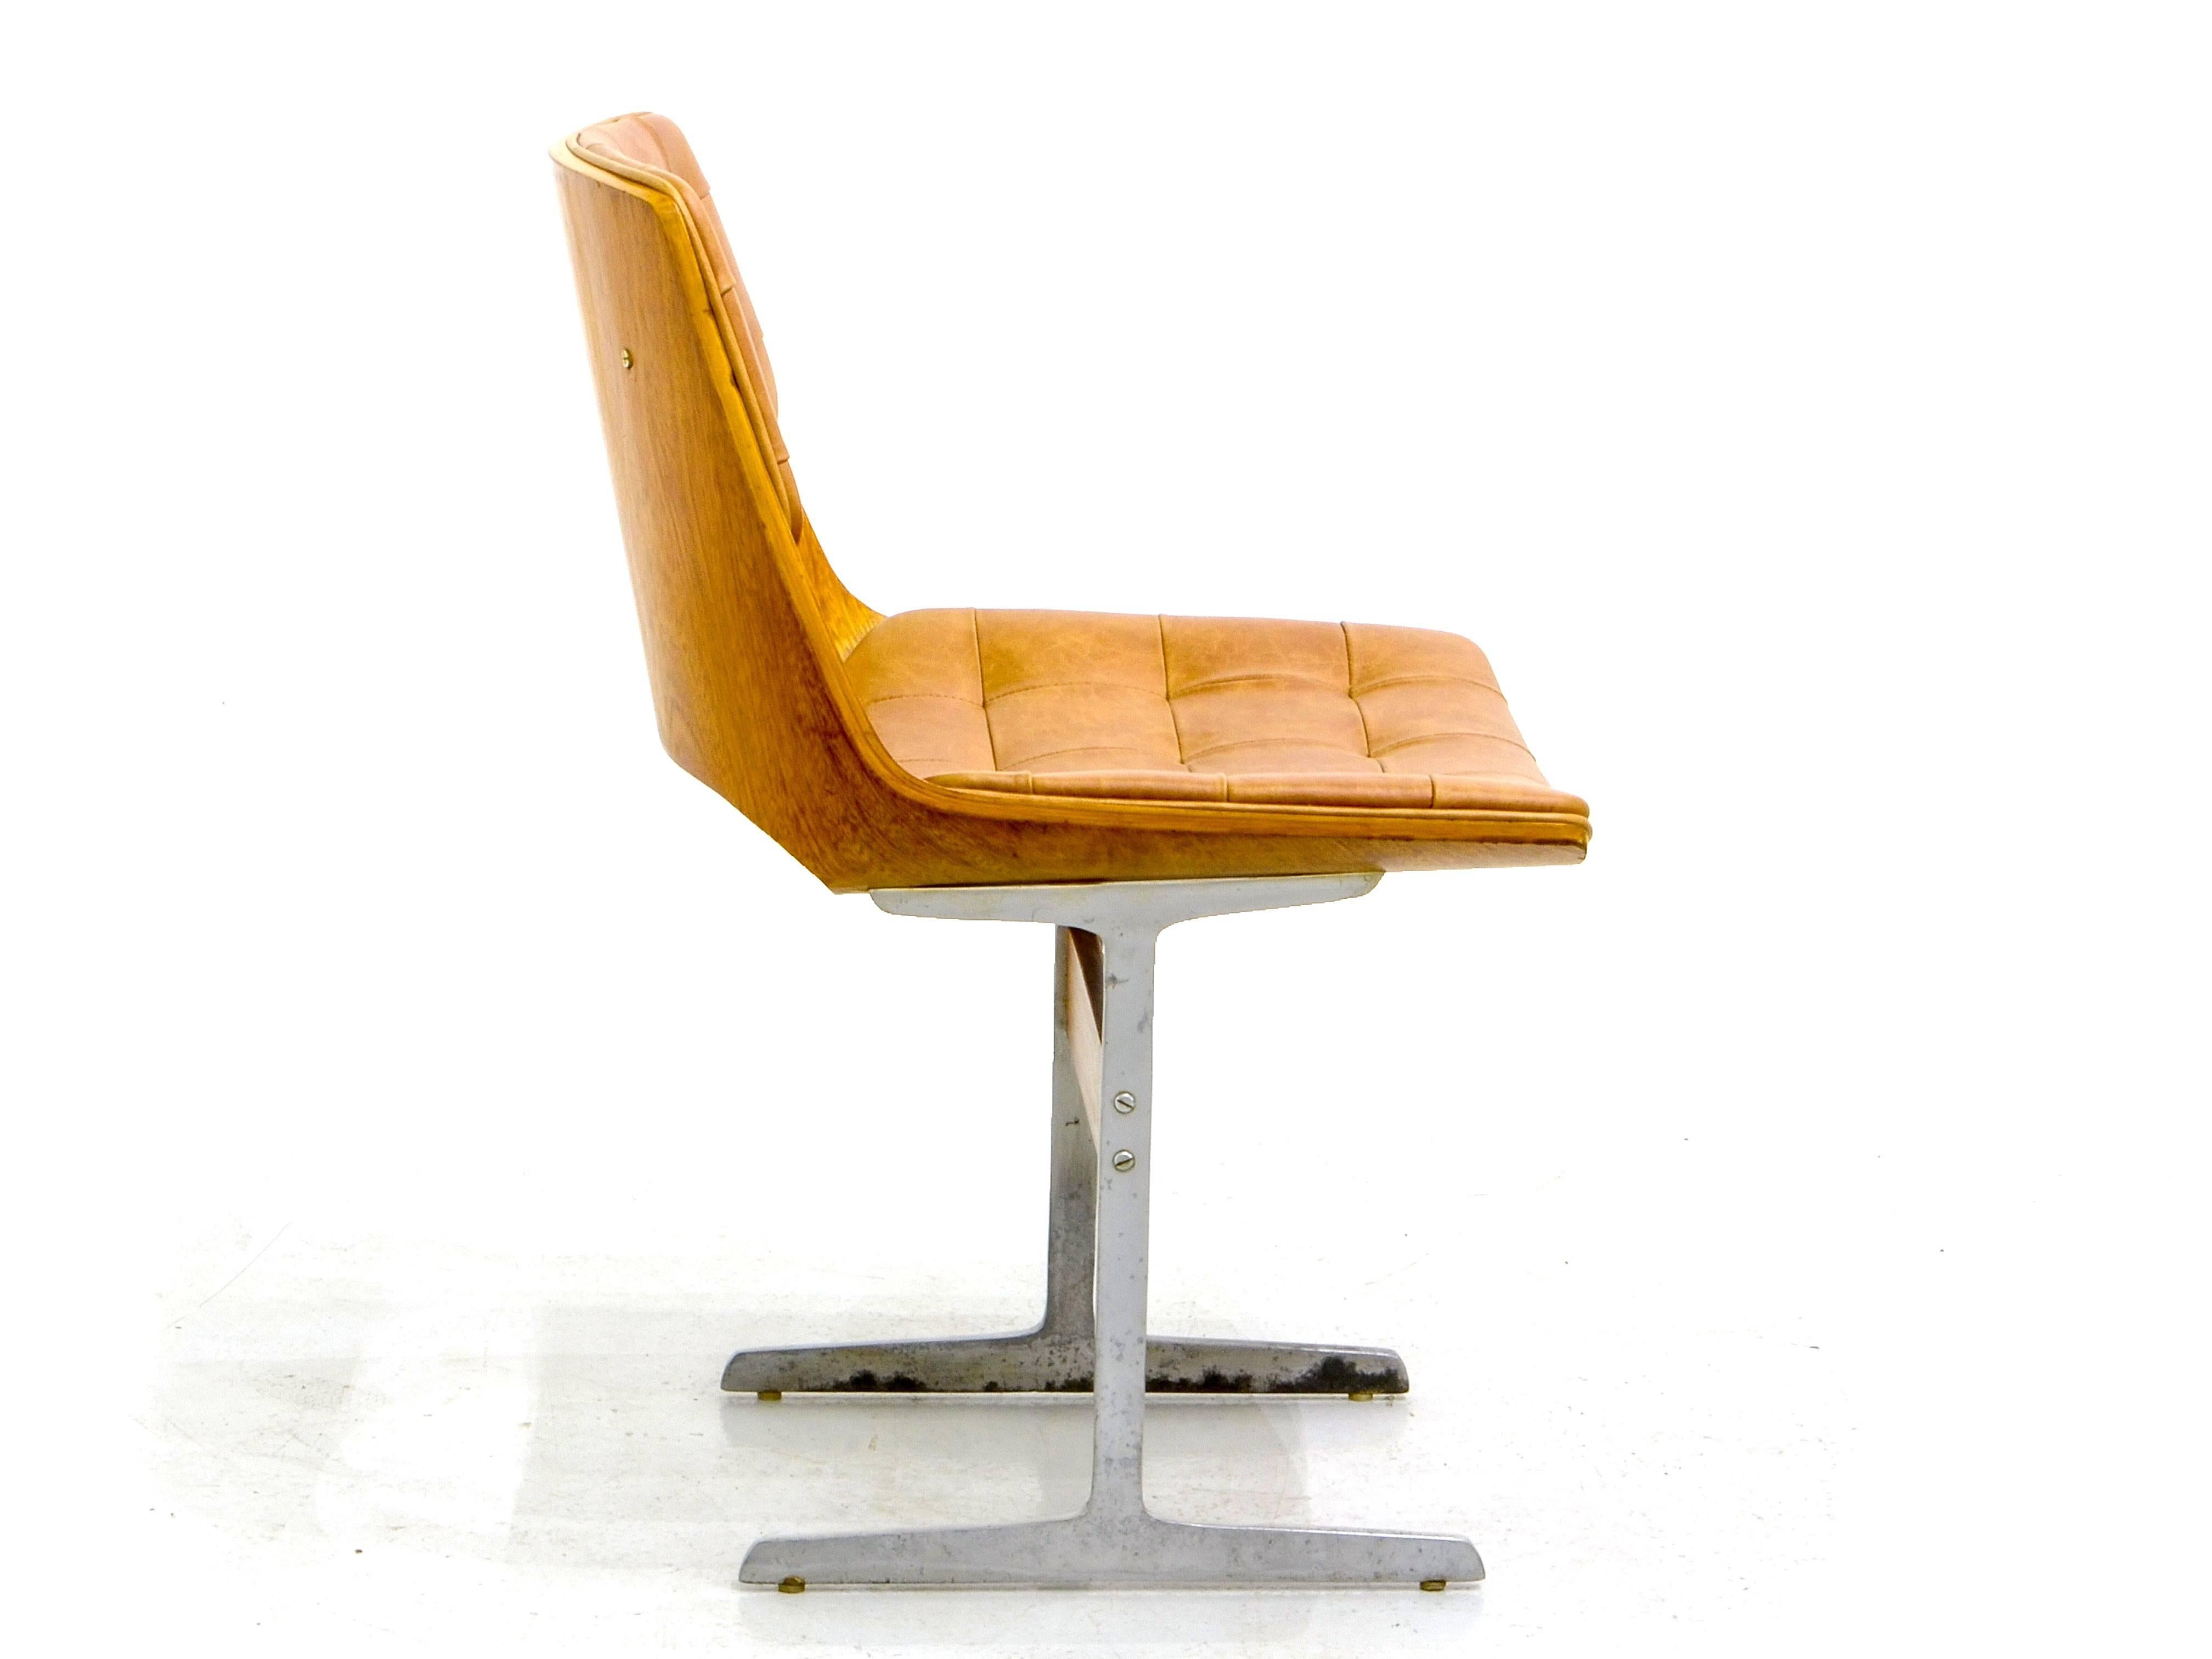 A simple and beautiful piece created by Jorge Zalszupin, one of the designers that best represent the Brazilian modernist tradition. This comfortable and delicate chair has its structure entirely made of tropical wood and is upholstered in natural